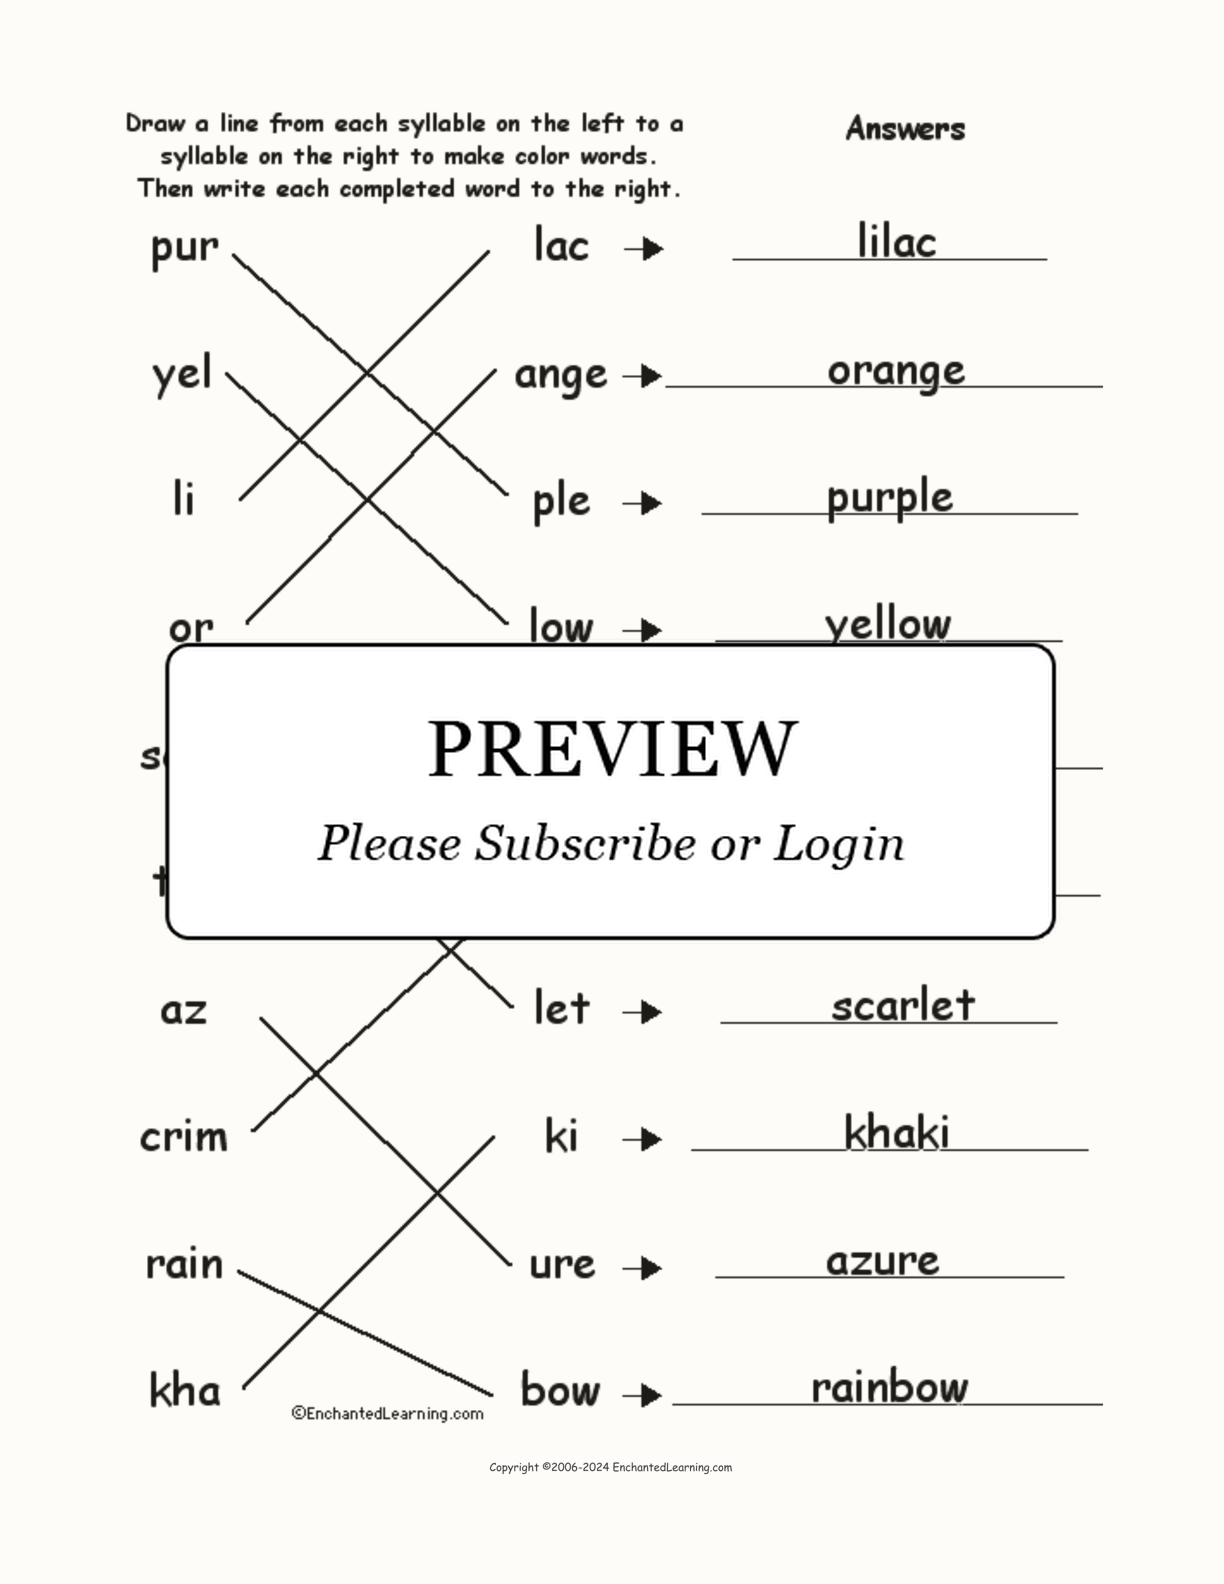 Match the Syllables: Color Words interactive worksheet page 2